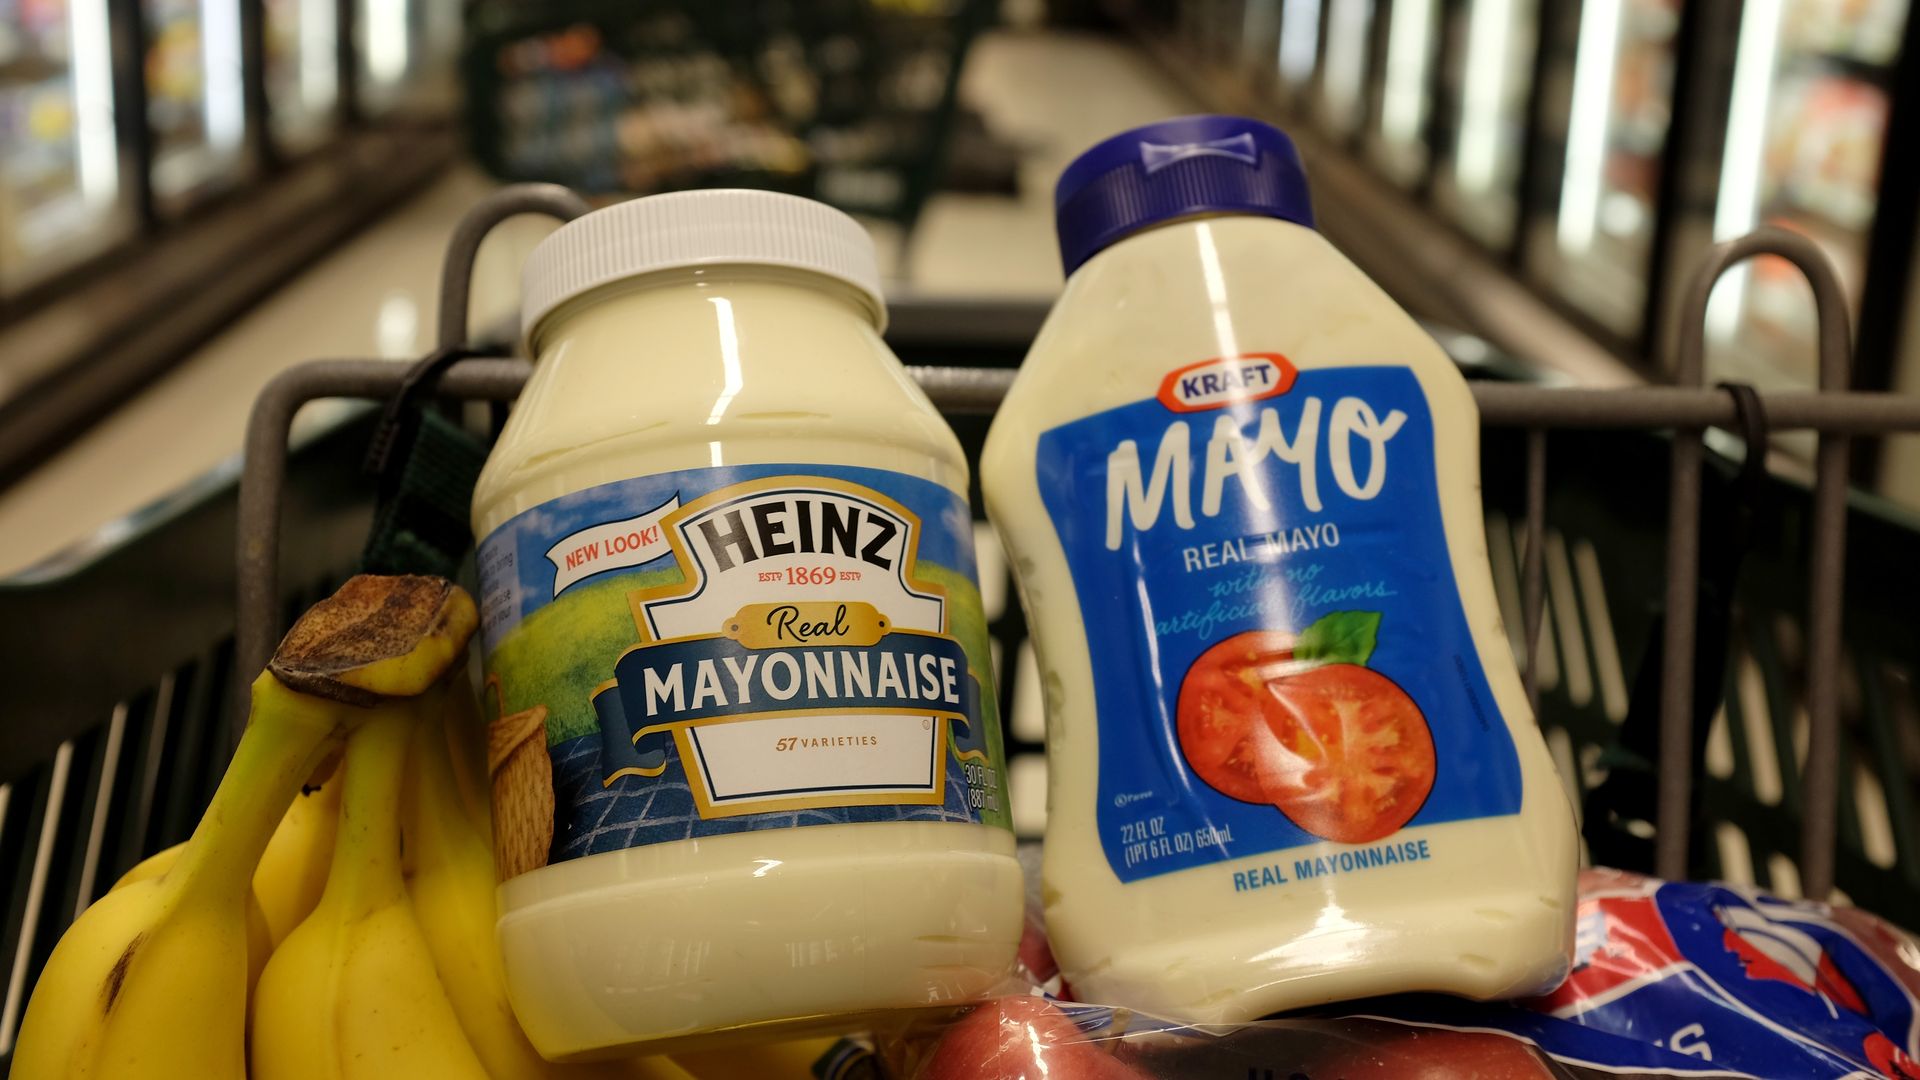 Two jars of mayo in a shopping cart with produce